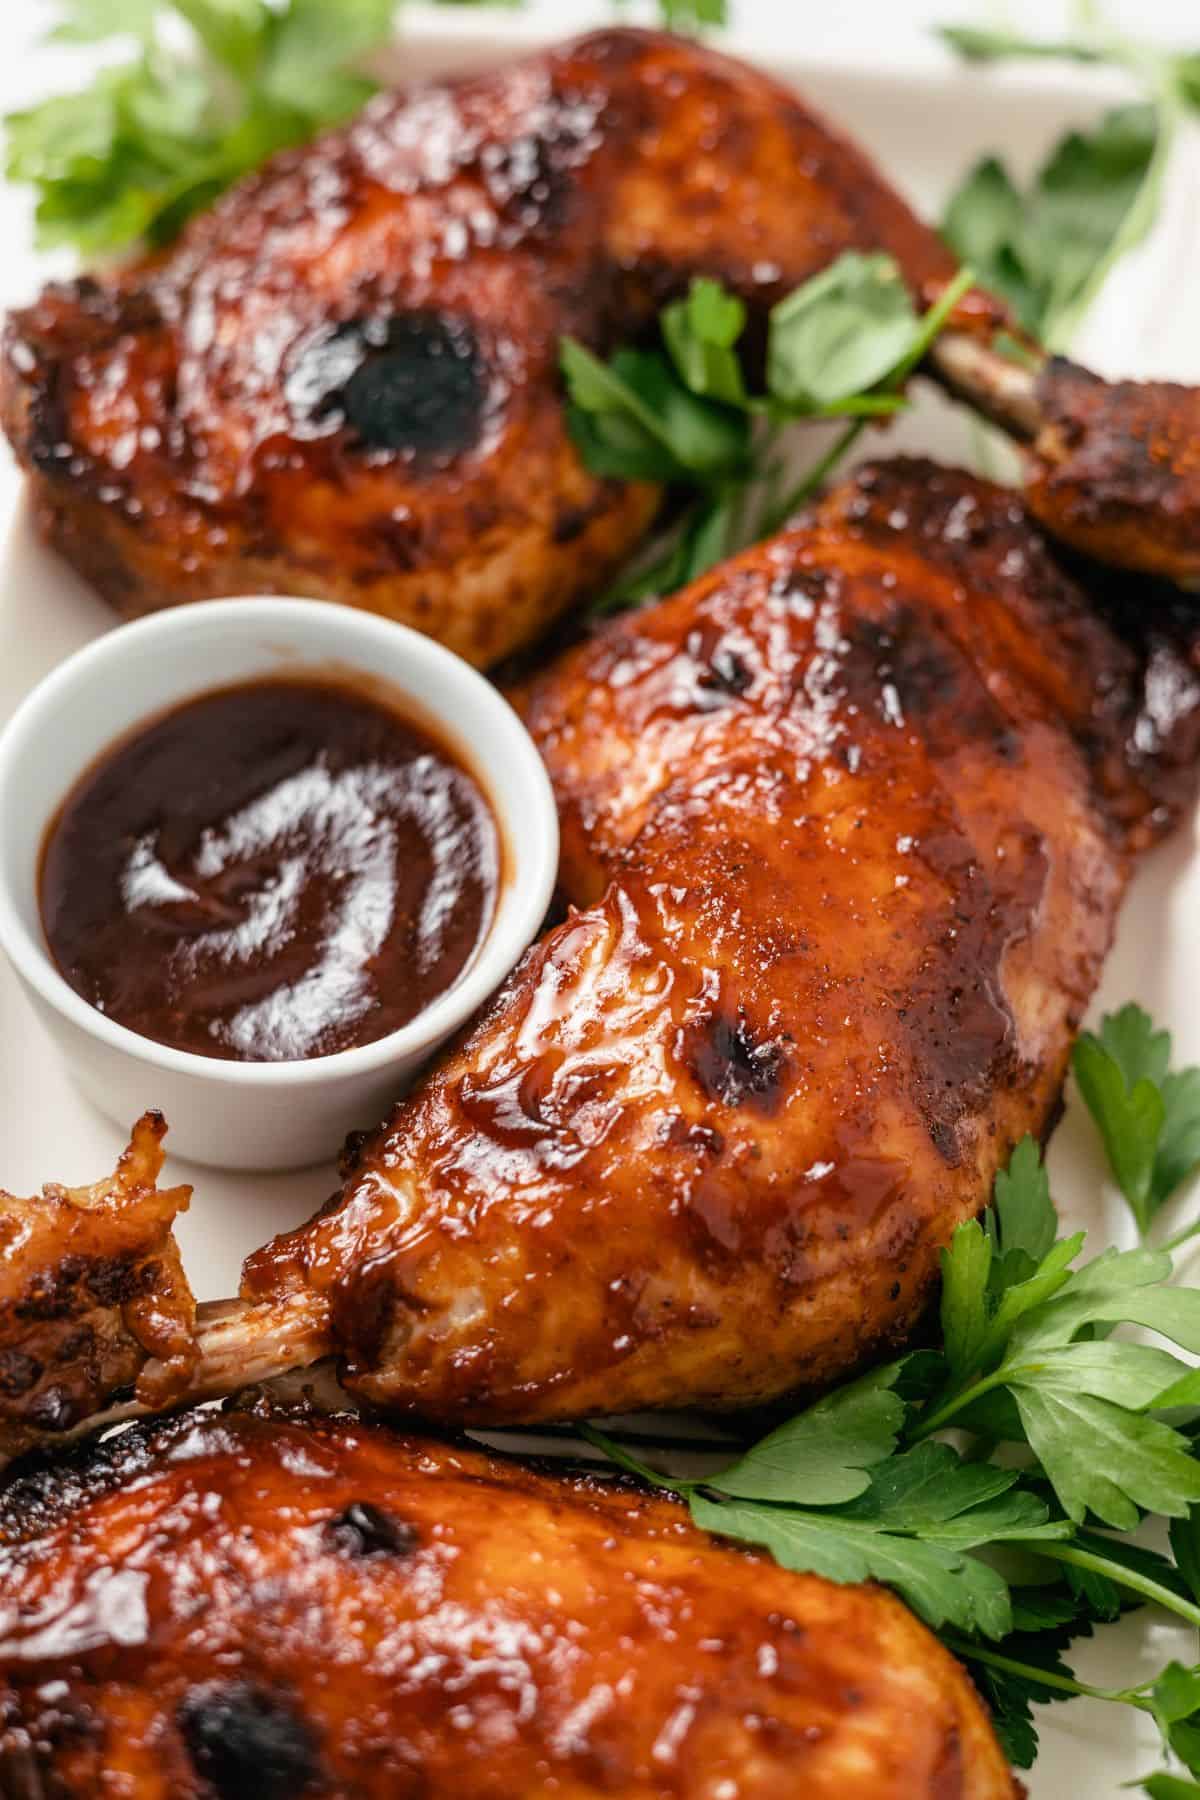 Crockpot BBQ Chicken quarters, glazed with rich barbecue sauce, served with a side of BBQ sauce dip and garnished with fresh parsley.